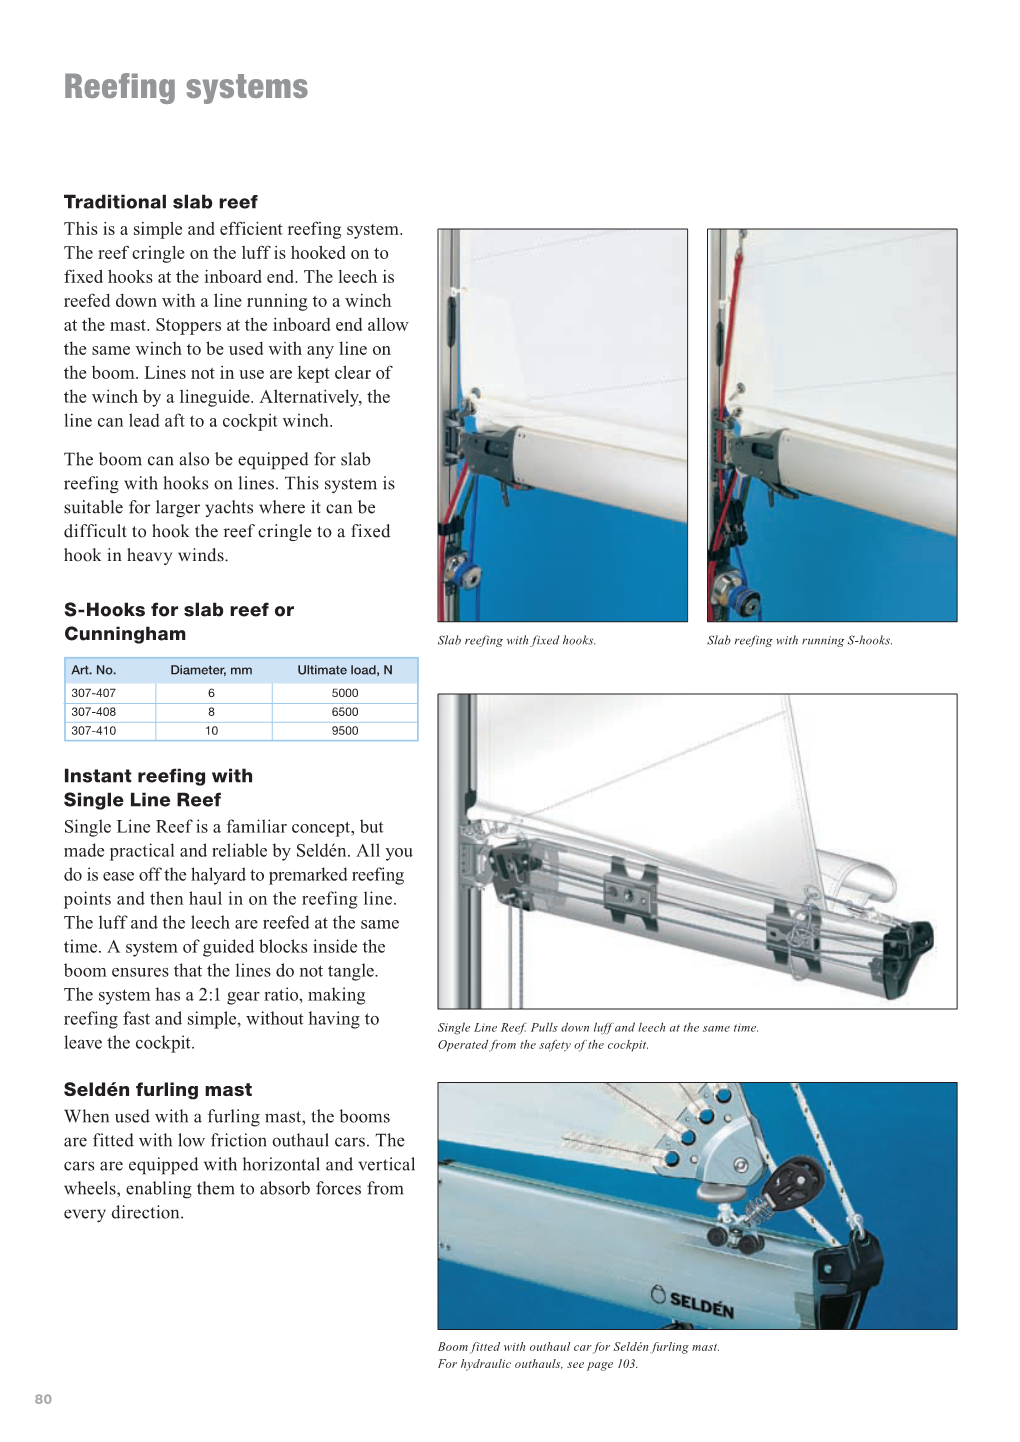 Reefing Systems